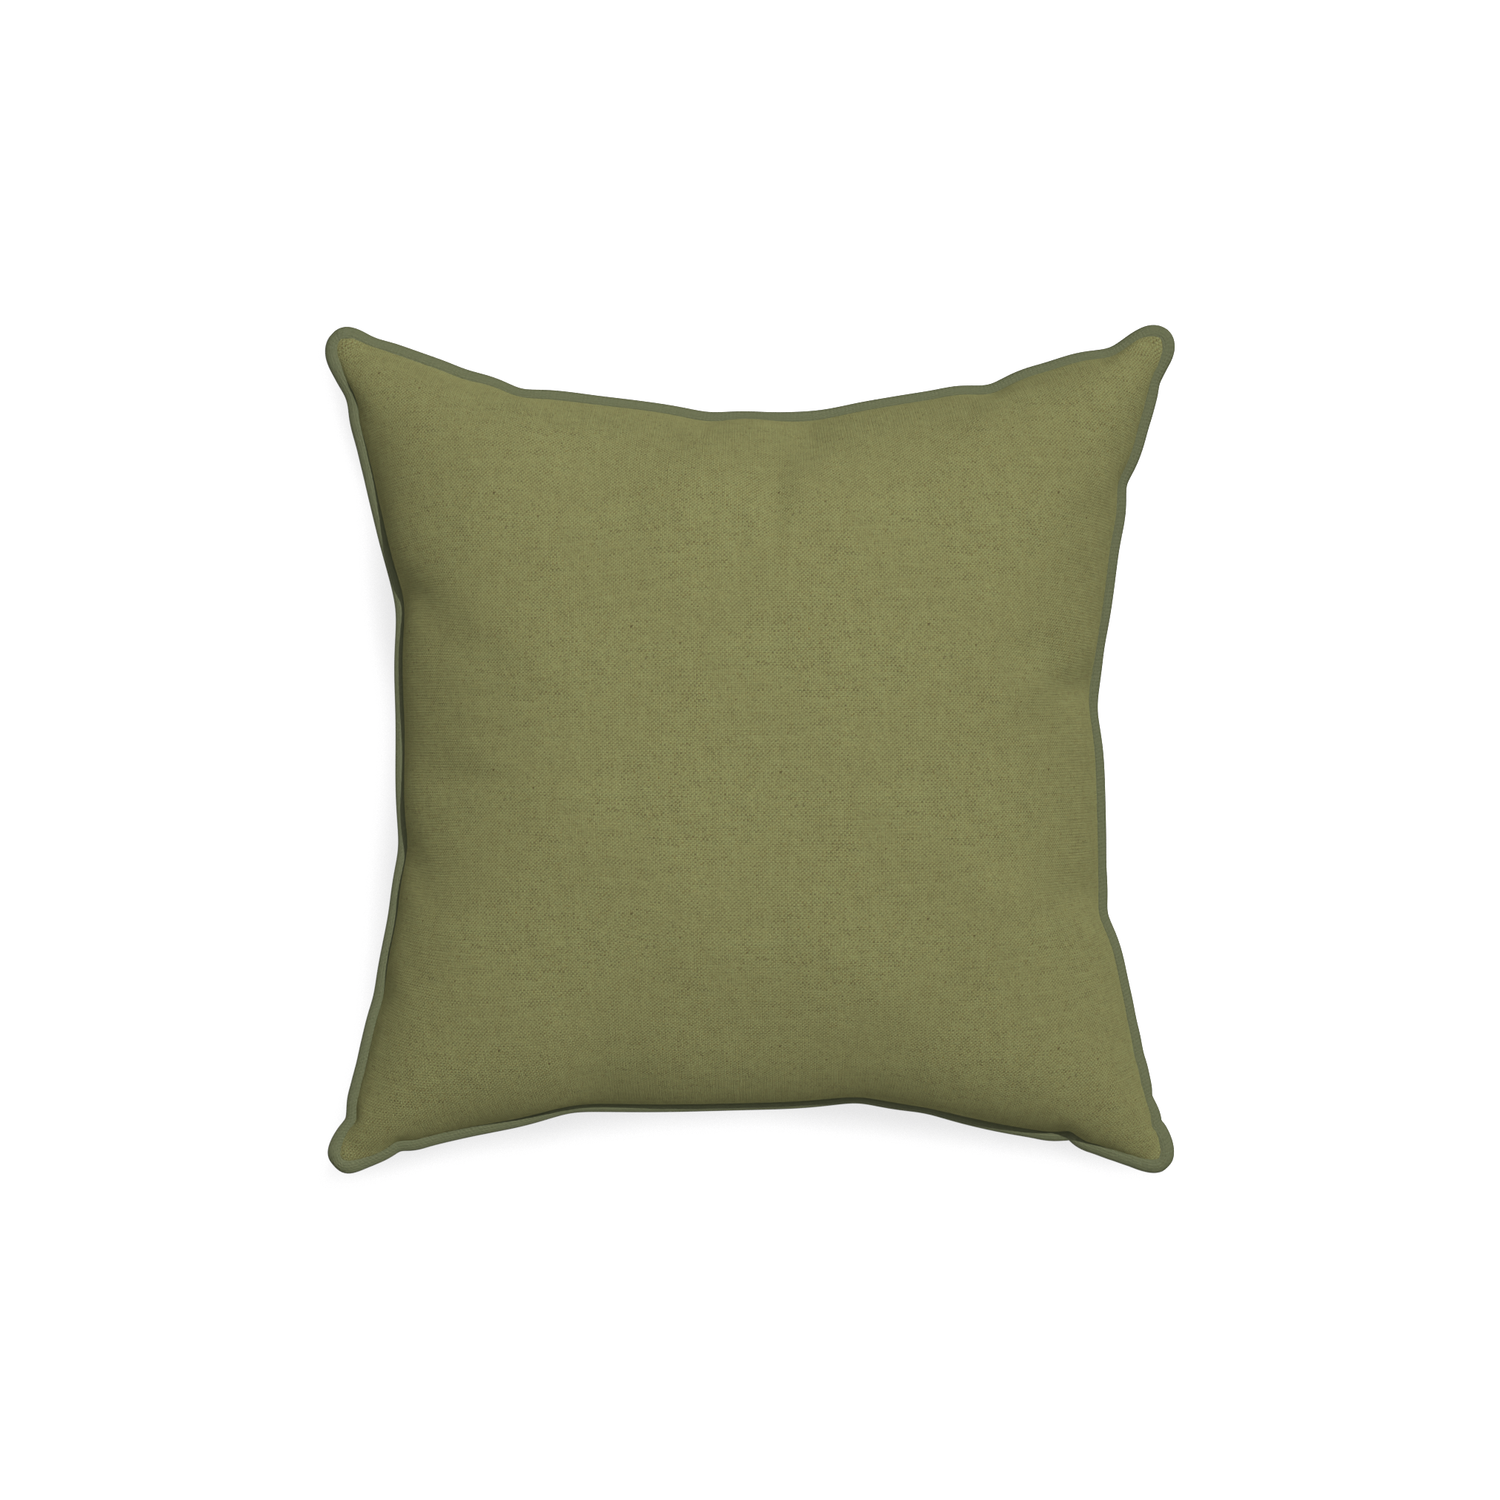 18-square moss custom moss greenpillow with f piping on white background